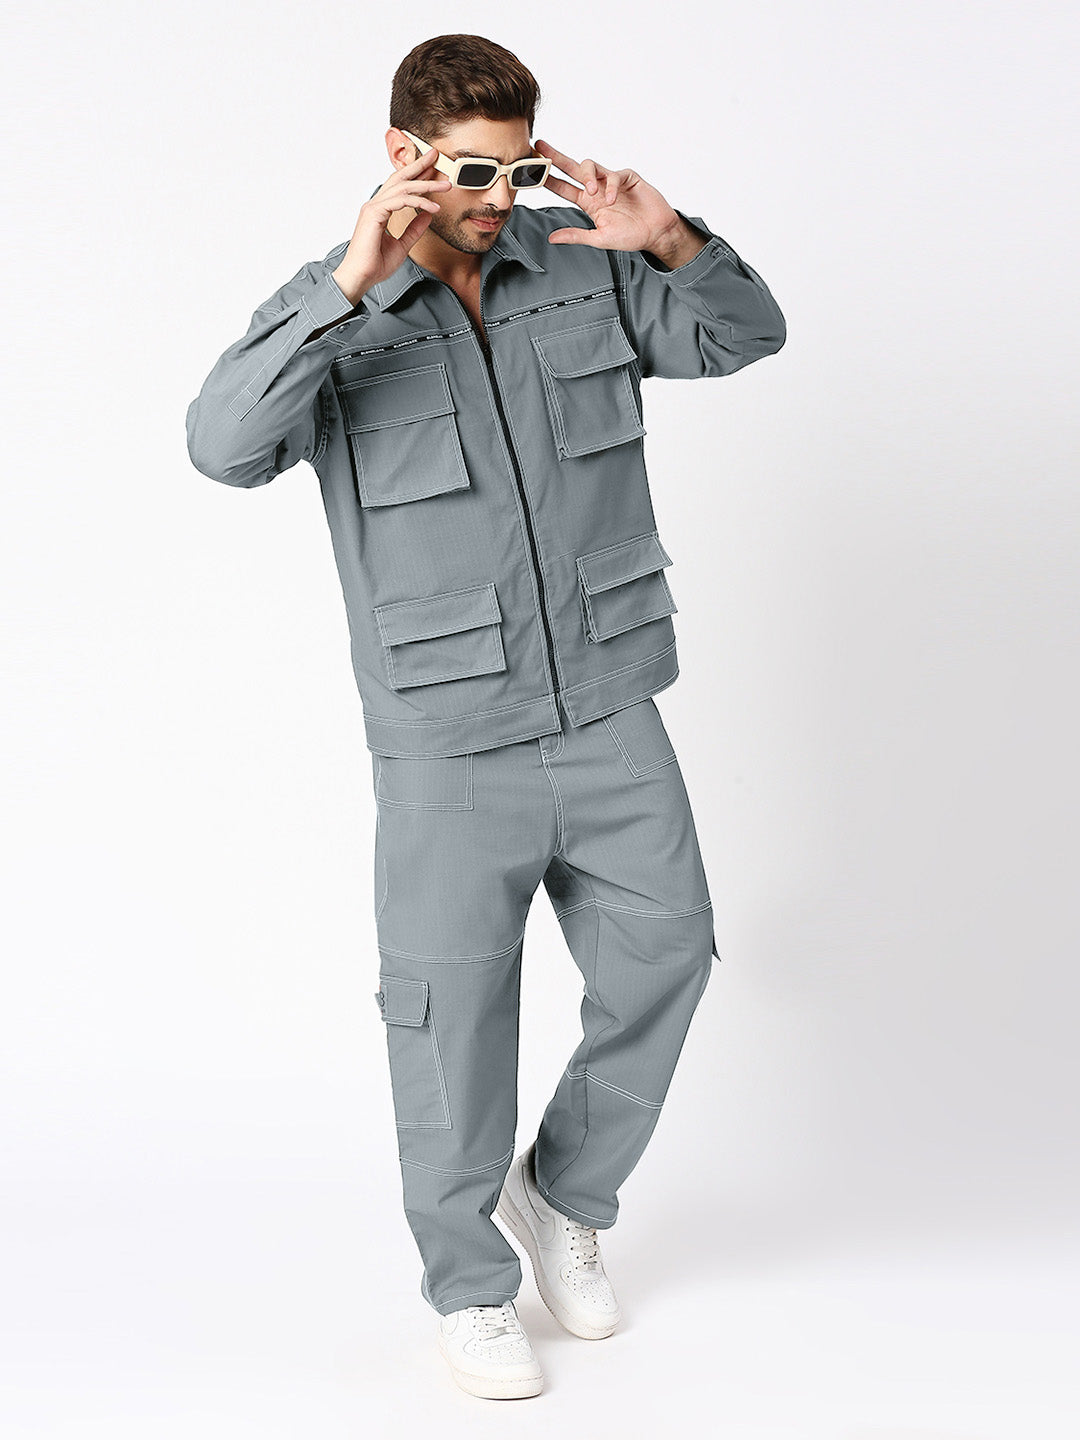 BLAMBLACK Men's Cargo Style Jacket With Pant Grey Color Co-Ord Set